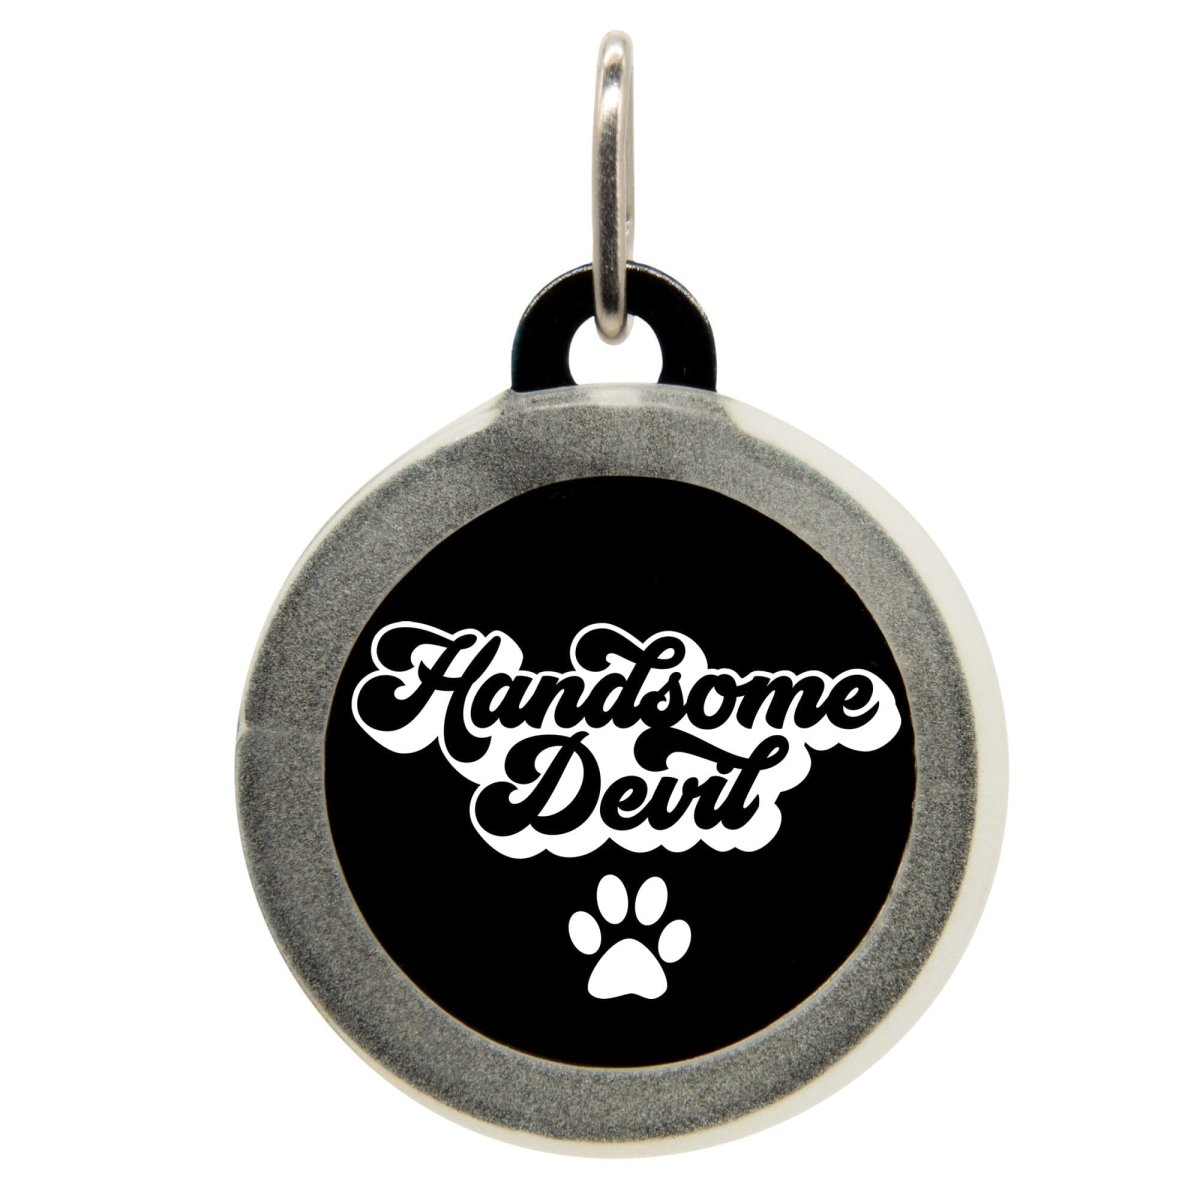 Handsome Devil Name Tag - Oh My Paw'd